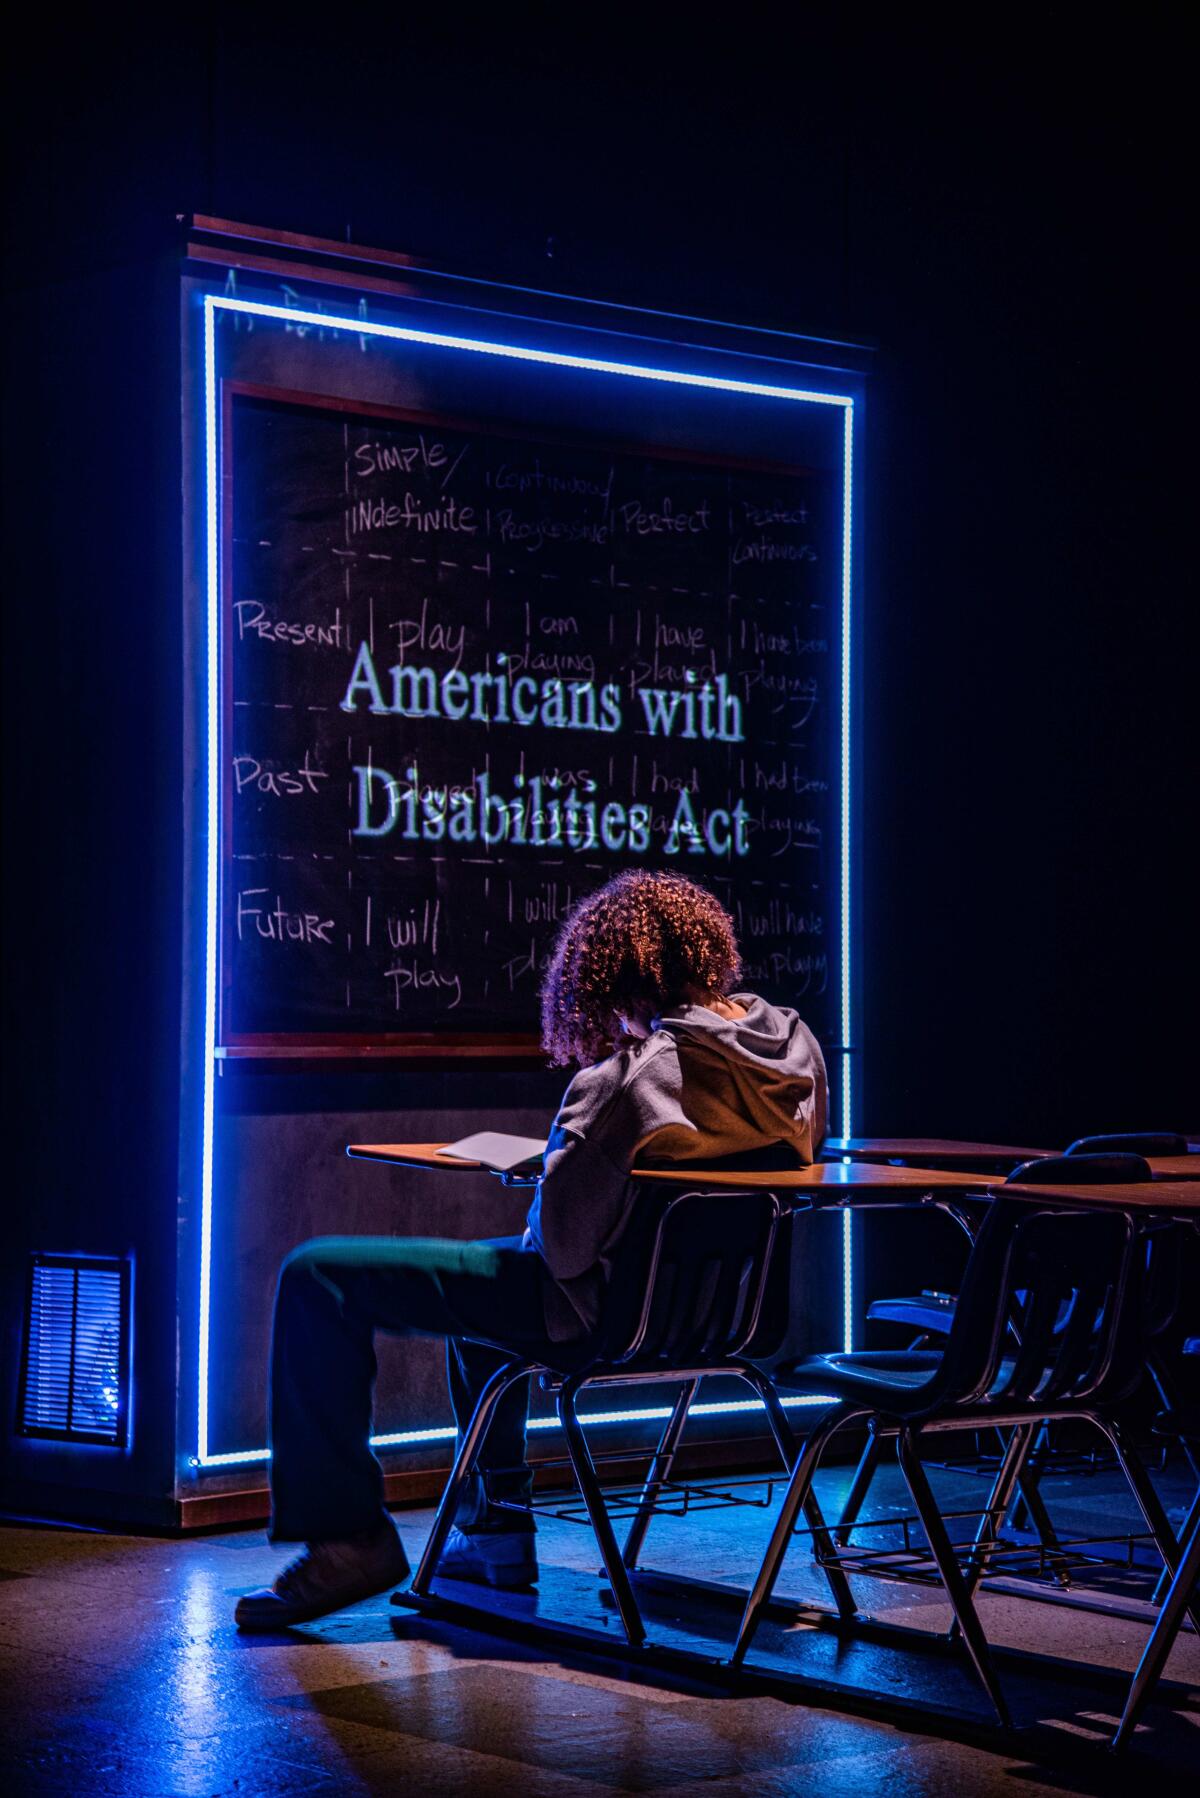 A young man sitting at a classroom desk with 'Americans with Disabilities Act' projected on the wall